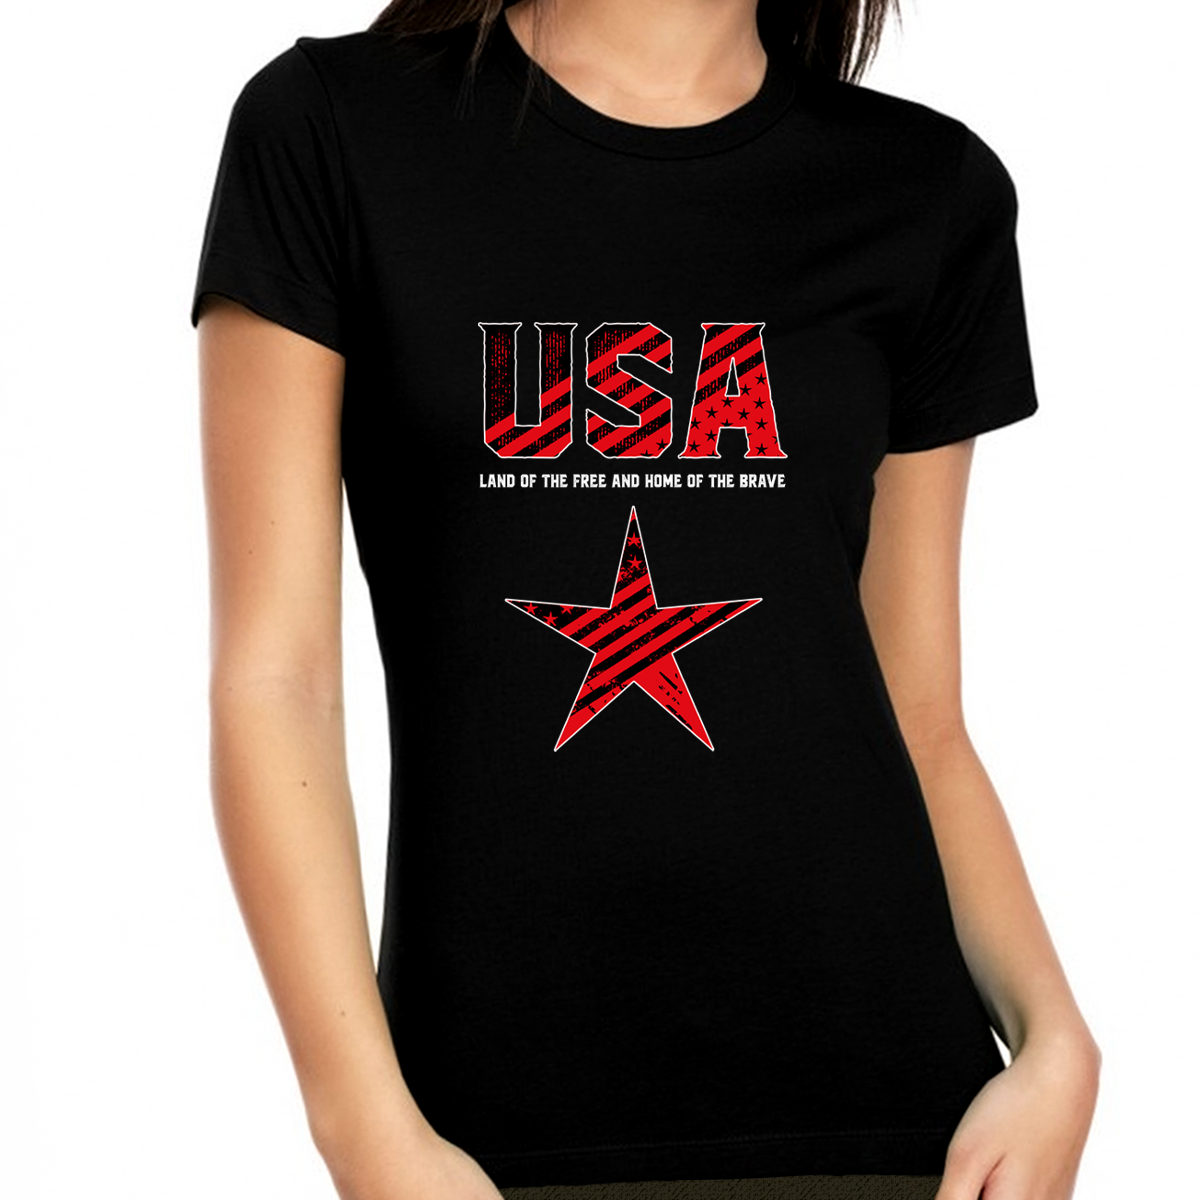 4th of July Shirts for Women - 4th of July Shirts - Patriotic Shirts for Women - 4th of July Shirt - Fire Fit Designs